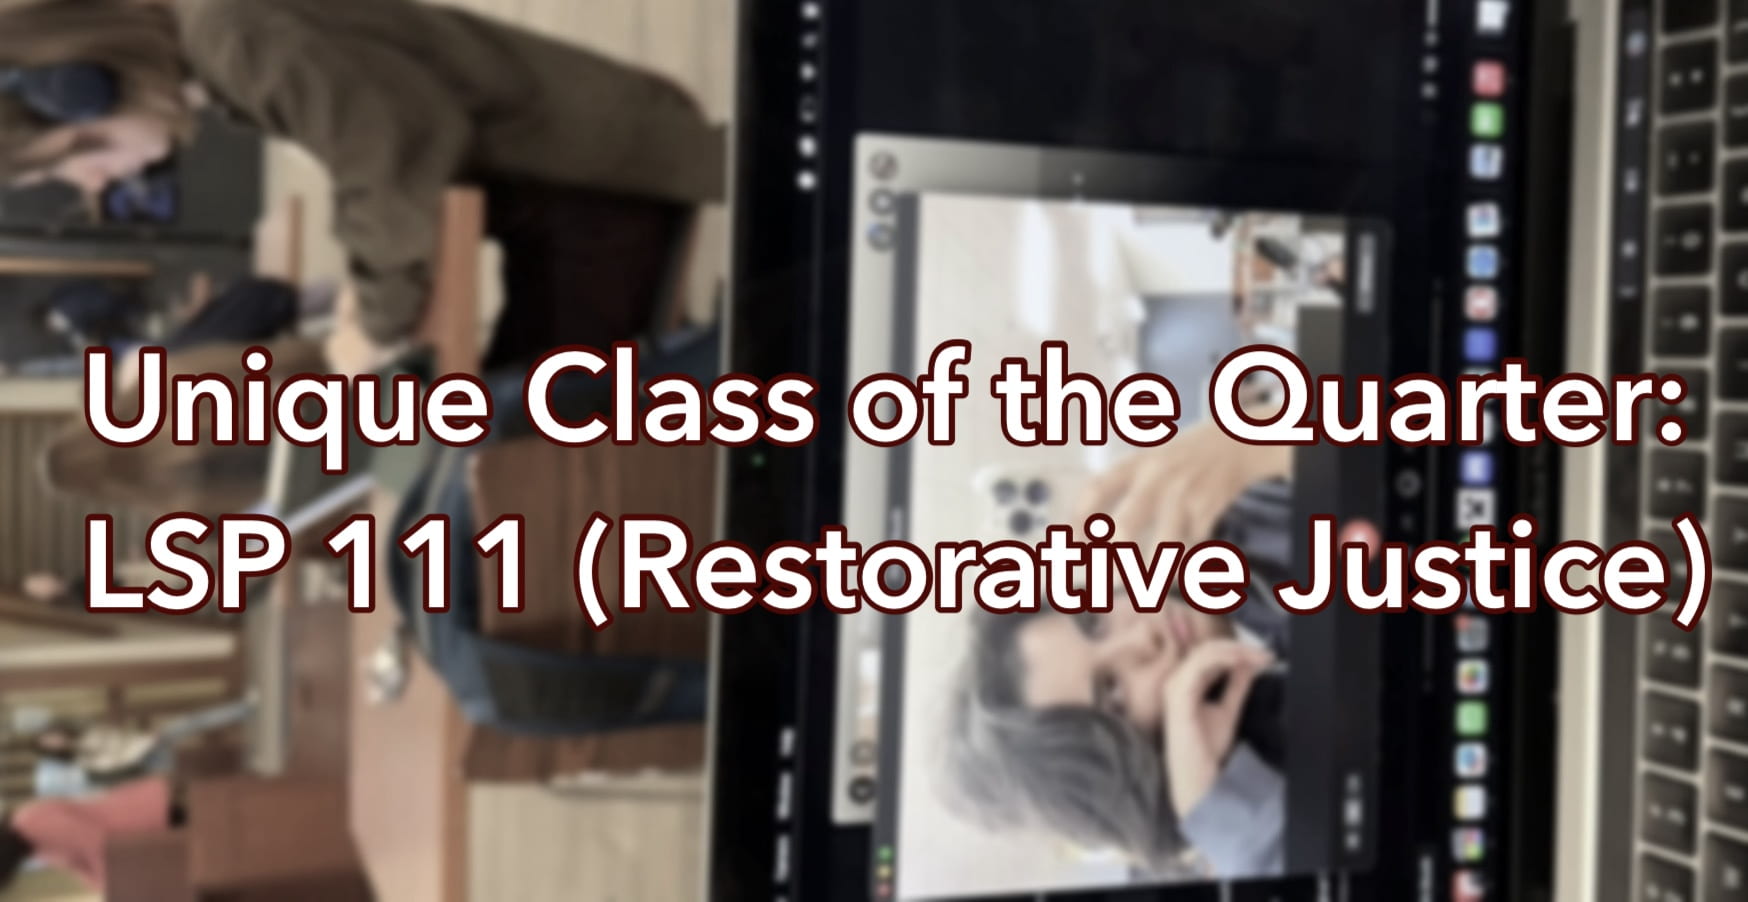 An image with the caption “Unique Class of the Quarter: LSP 111 (Restorative Justice)” on it.